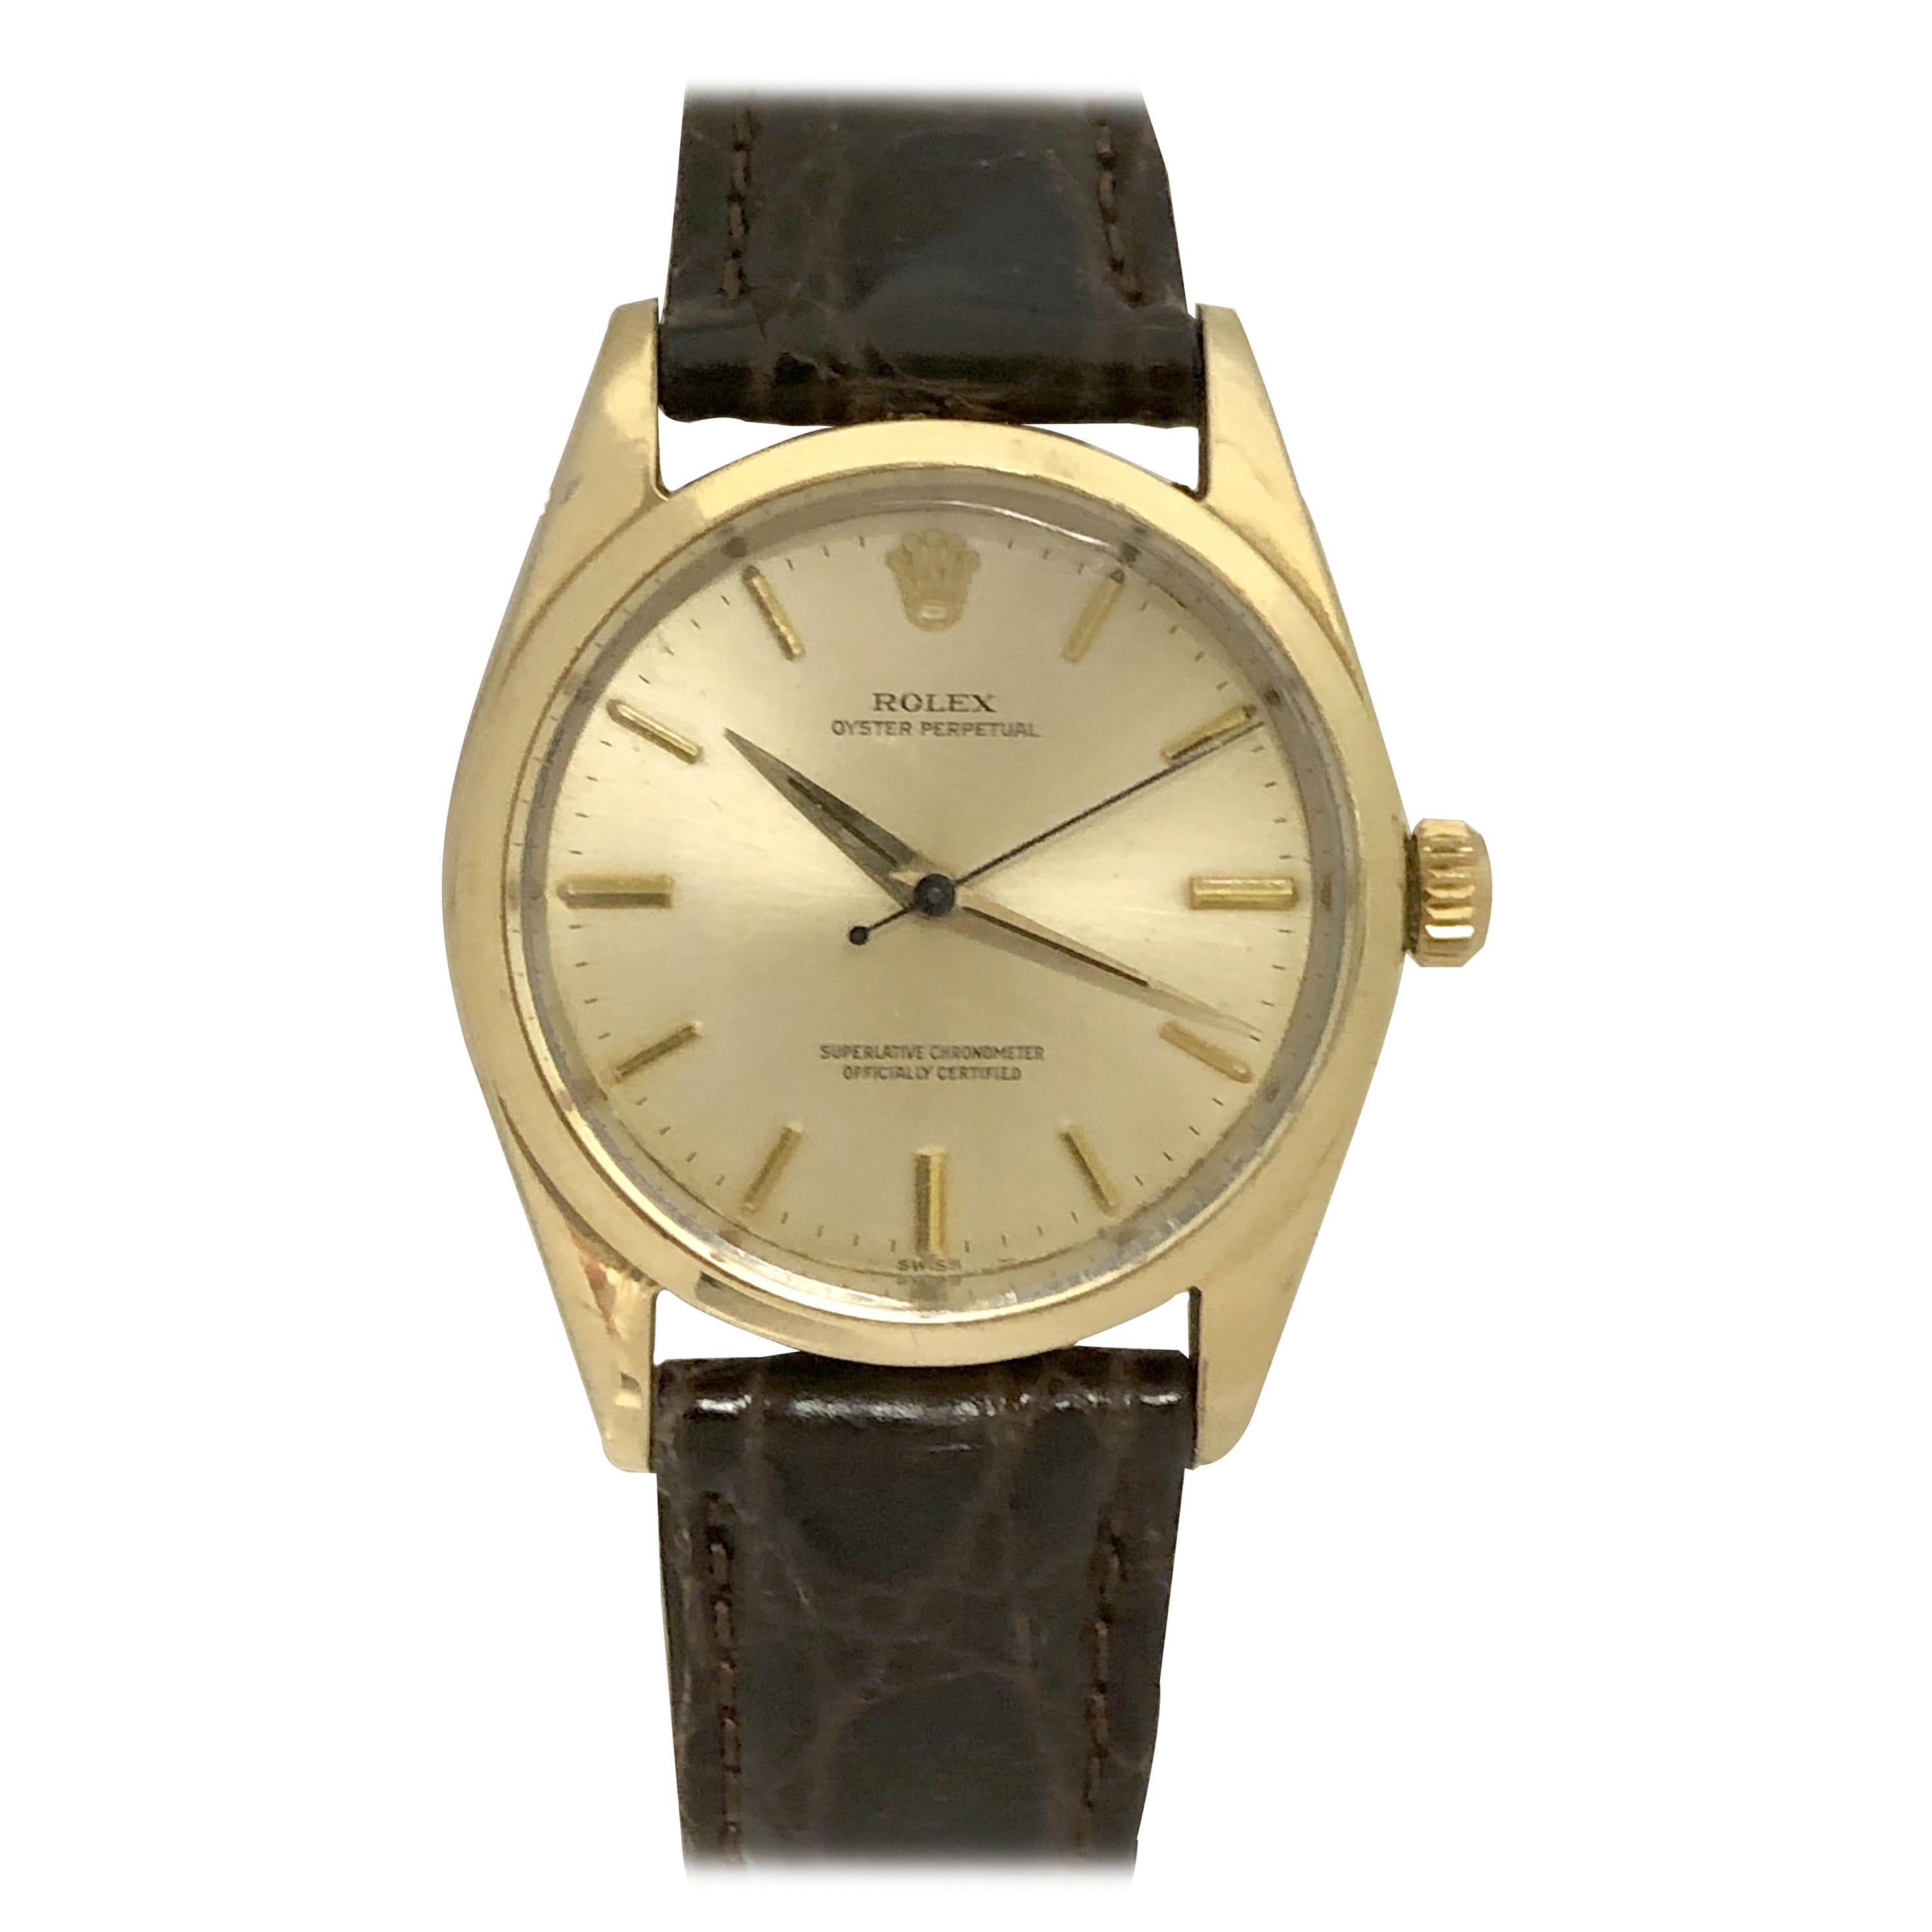 Rolex Oyster Perpetual 1980 Ref 1014 Gold Shell Automatic Wristwatch